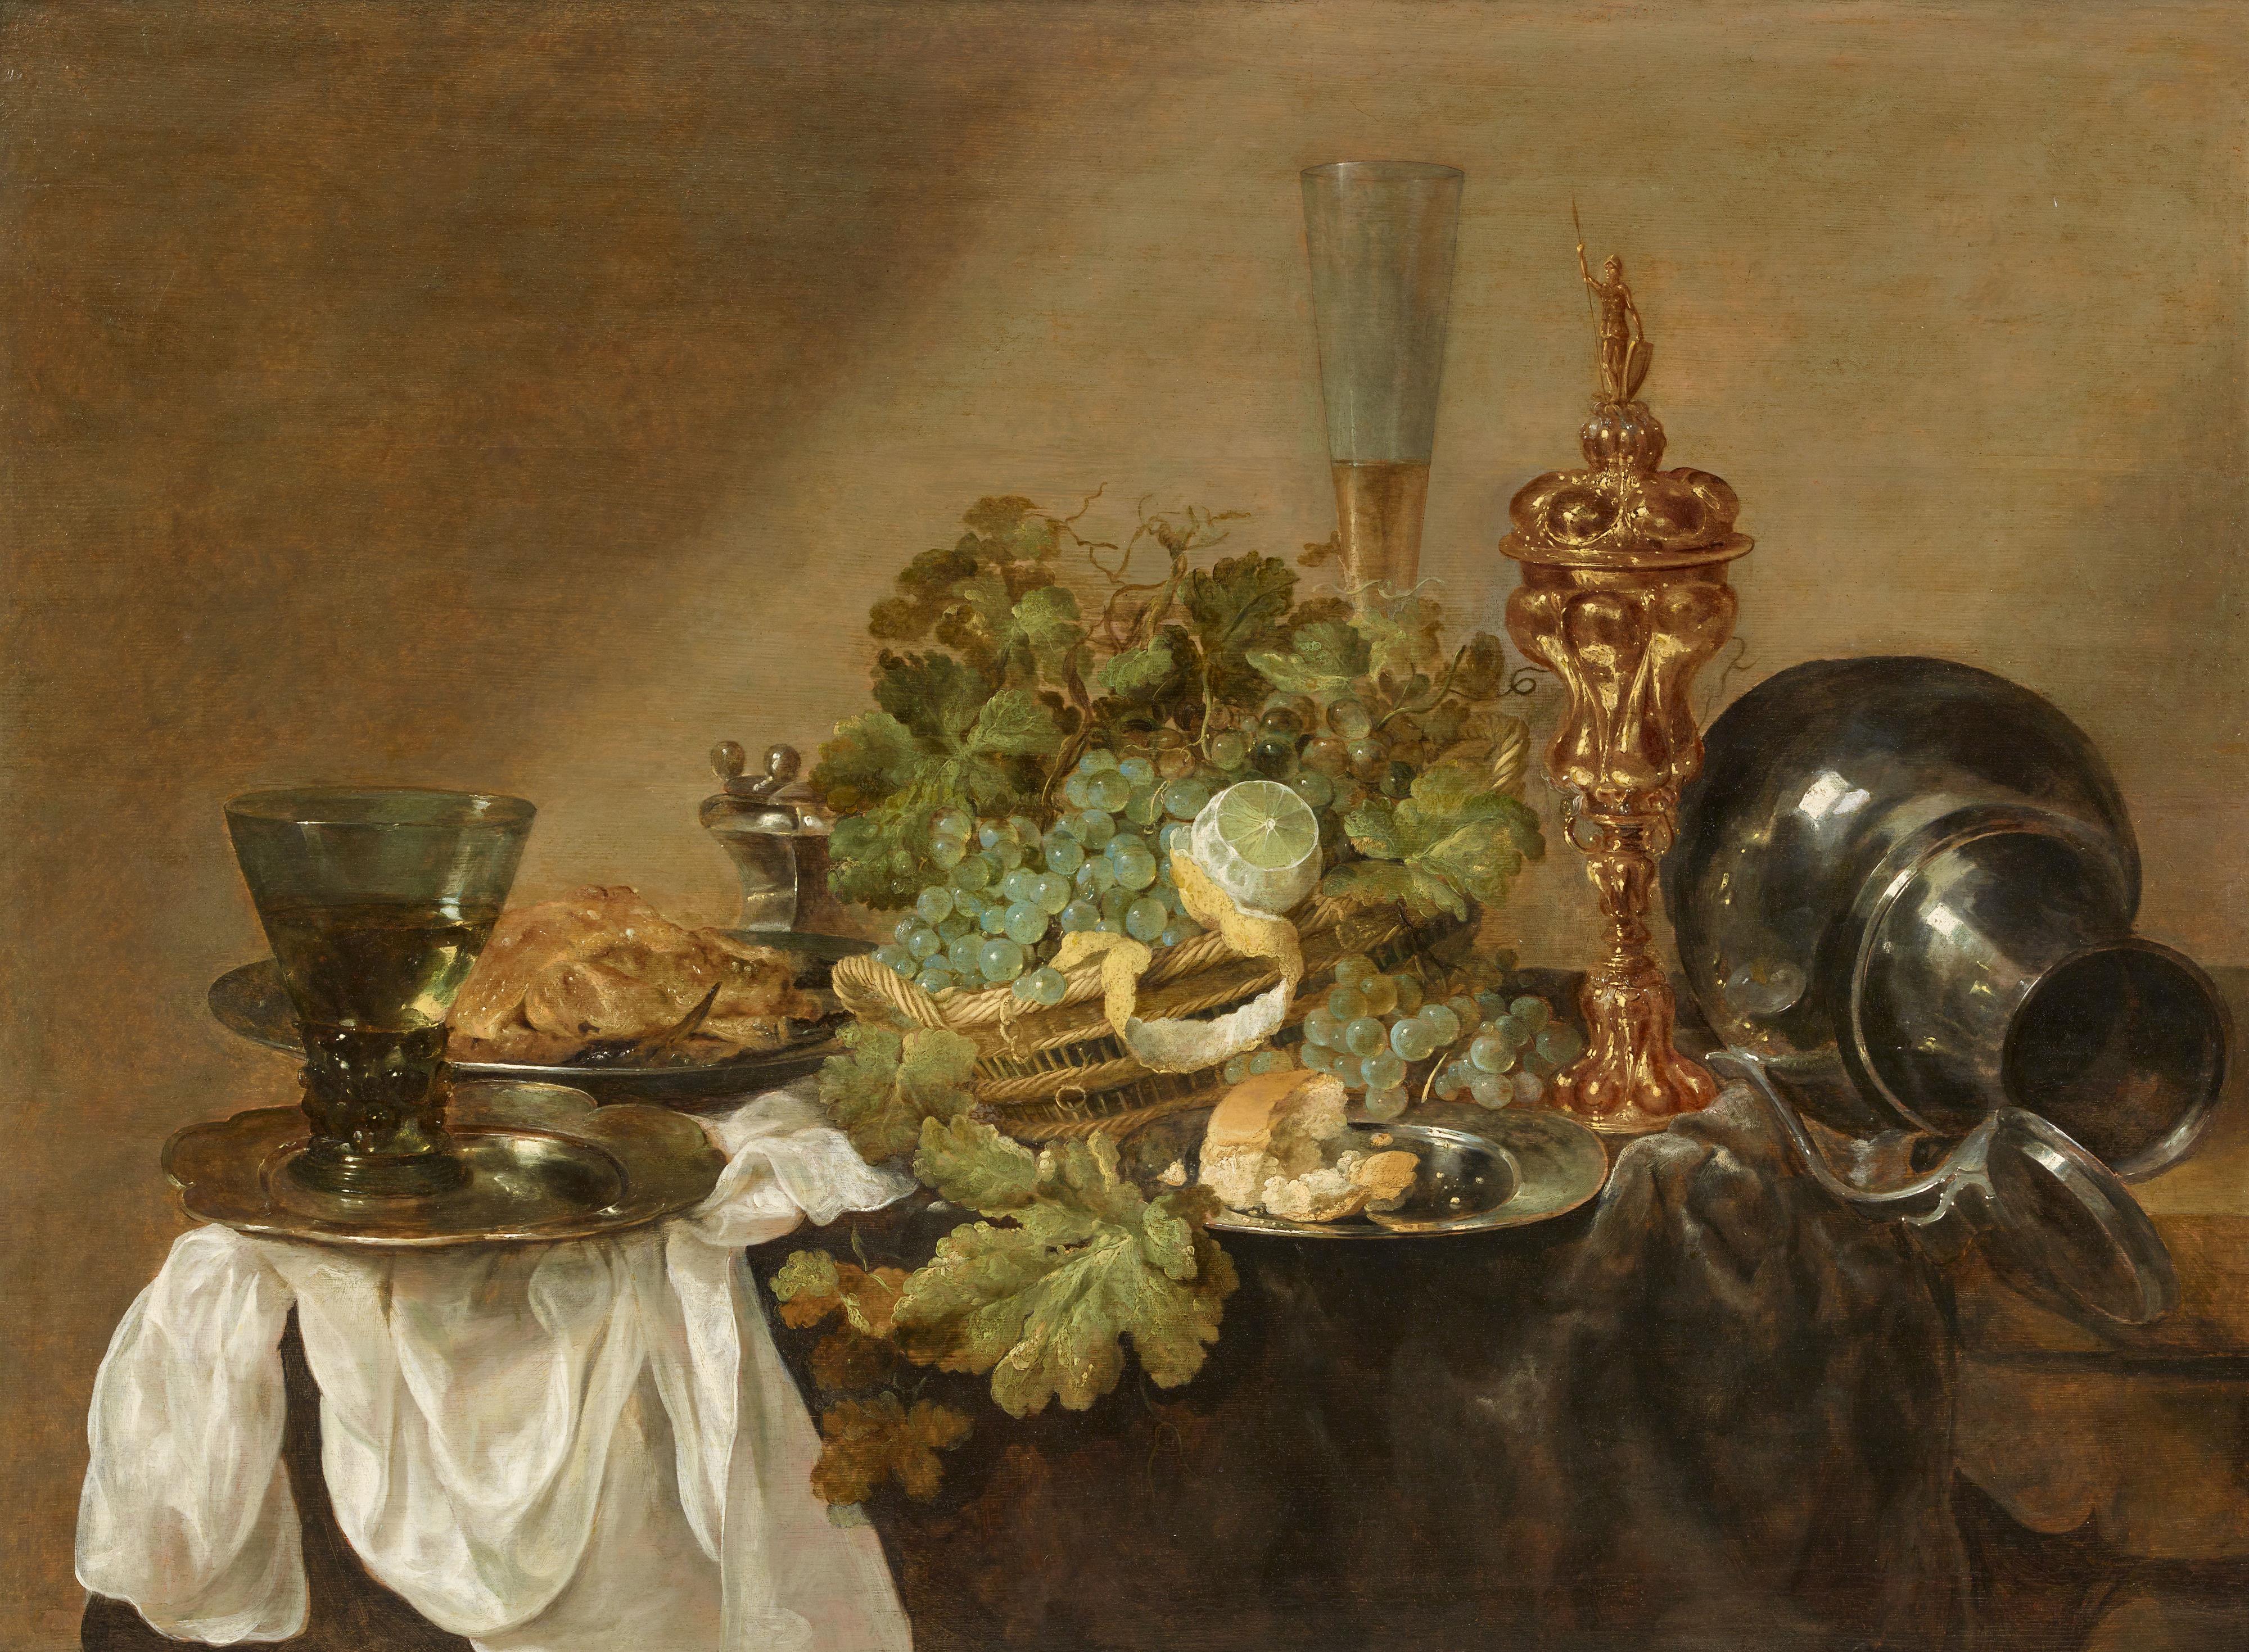 Abraham van Beijeren - A Still Life with Grapes, Lemons, Bread, a Rummer and a gilded Chalice on a Table - image-1